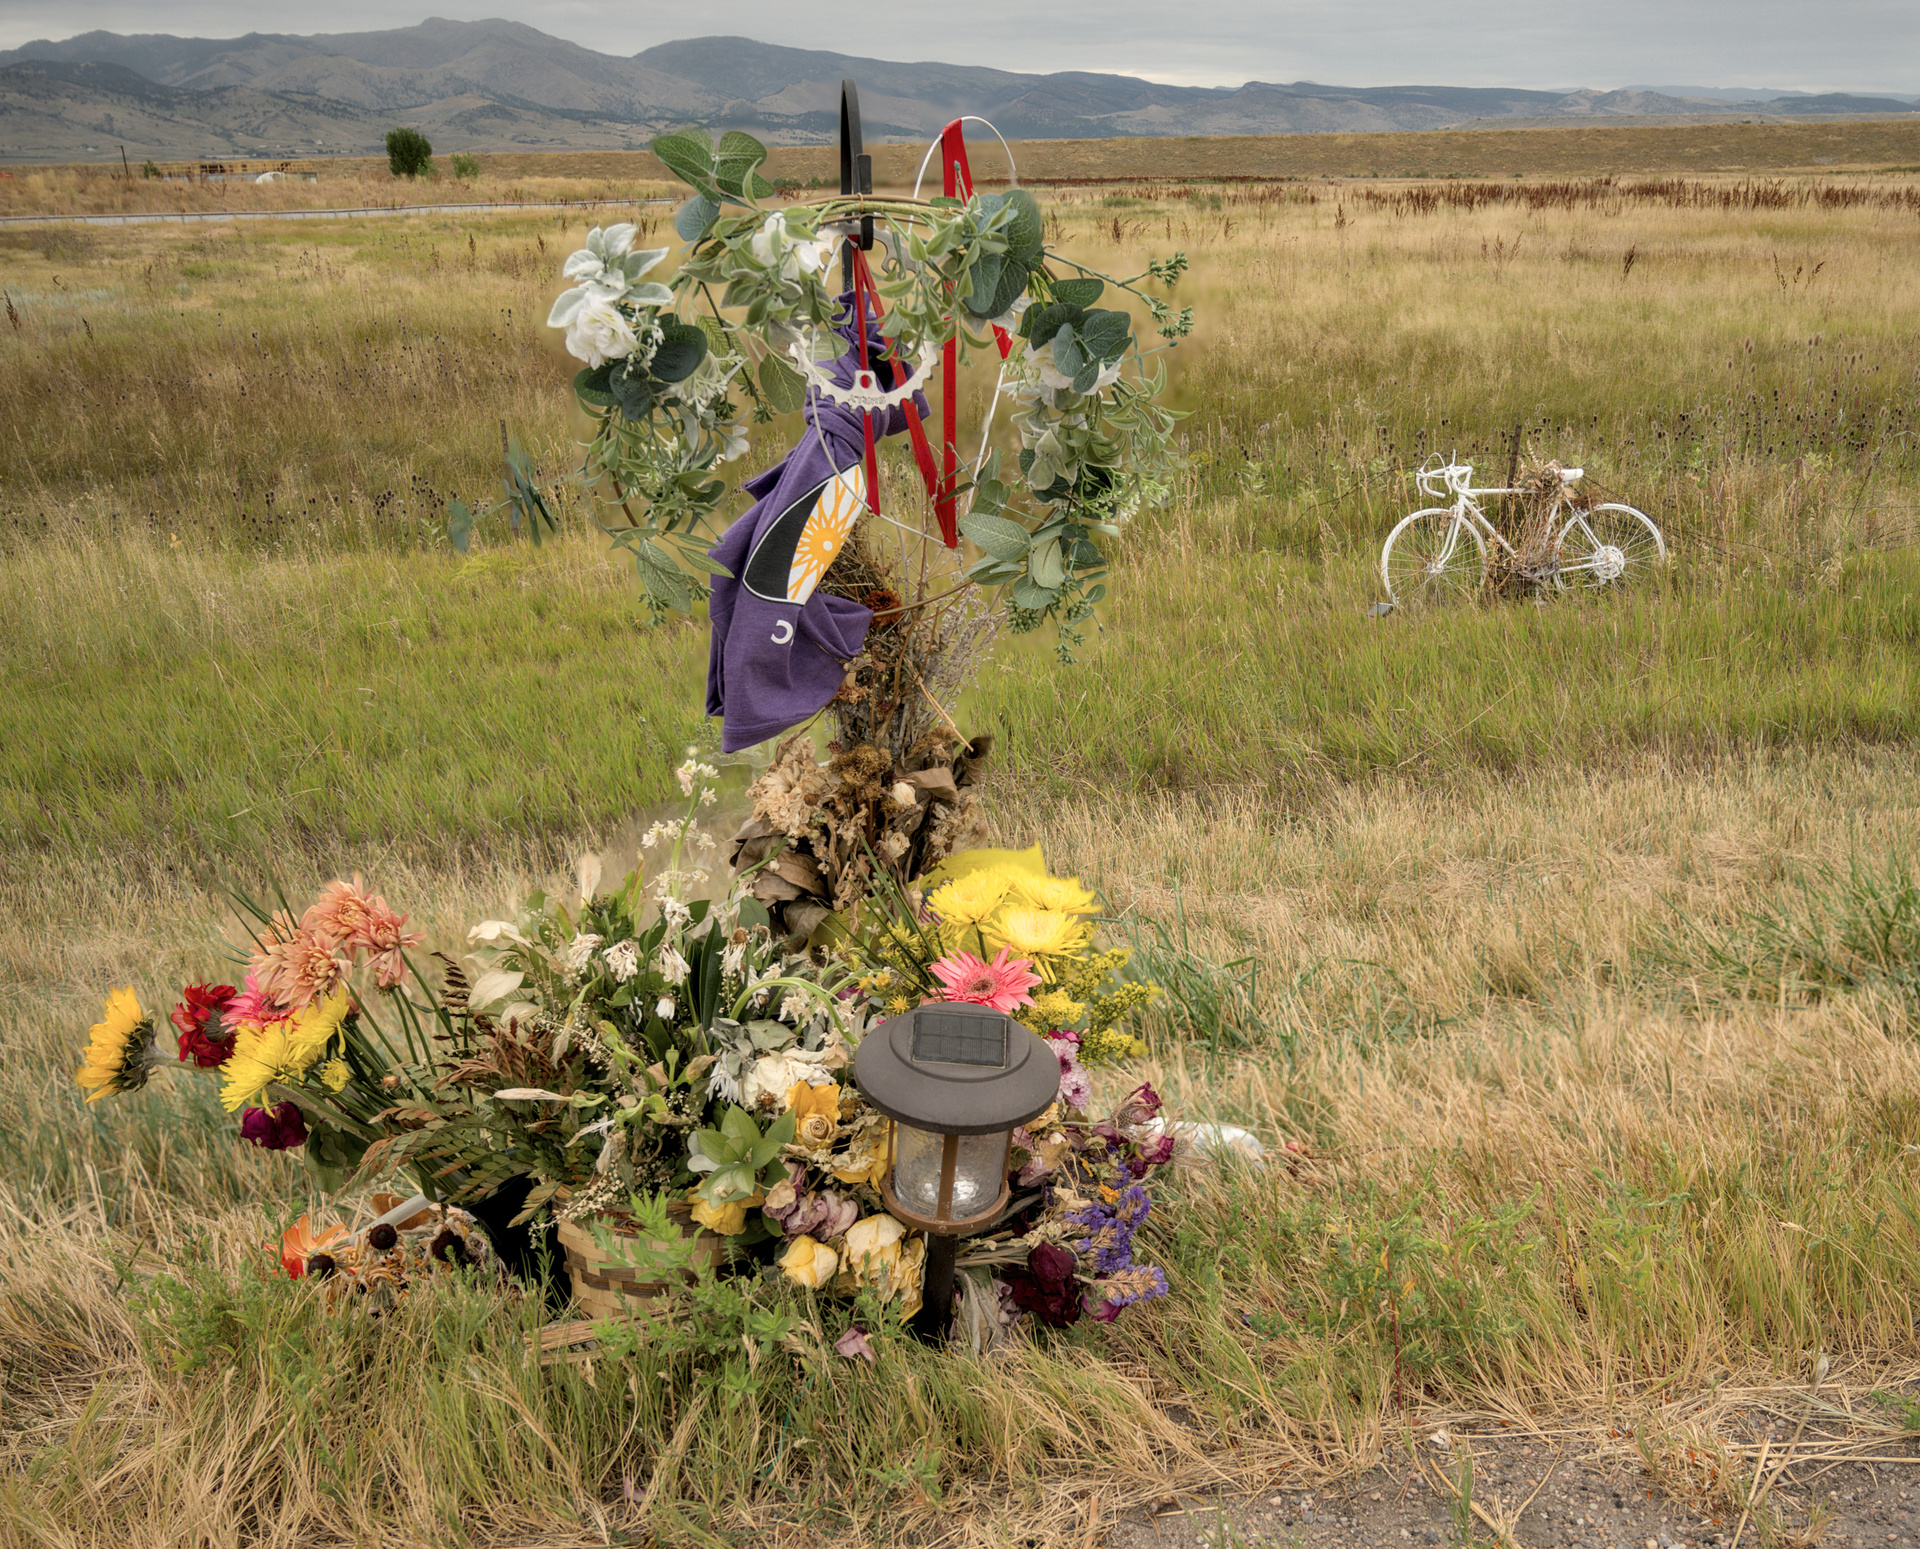 Driver blamed ‘steering difficulty’ in crash that killed USA cyclist Magnus White